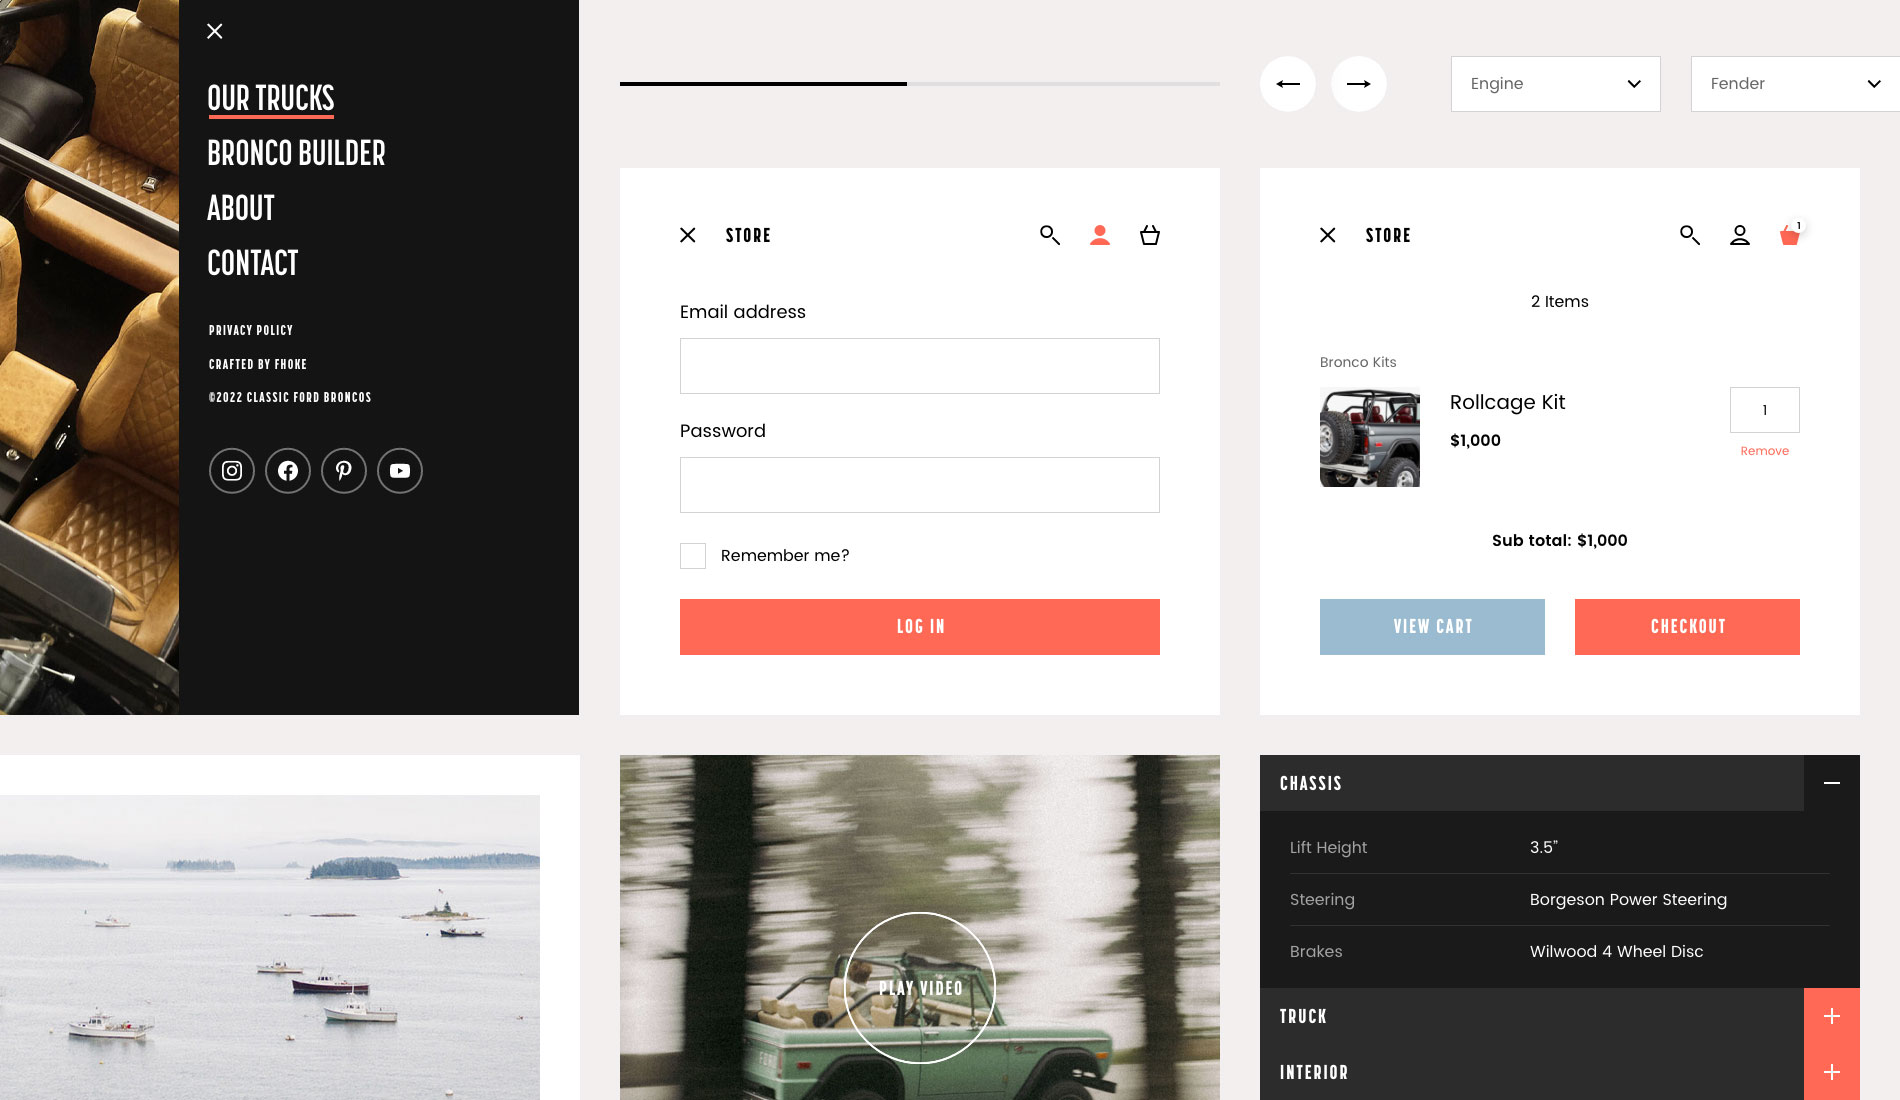 Classic Ford Broncos User Interface Design by London WordPress agency Fhoke